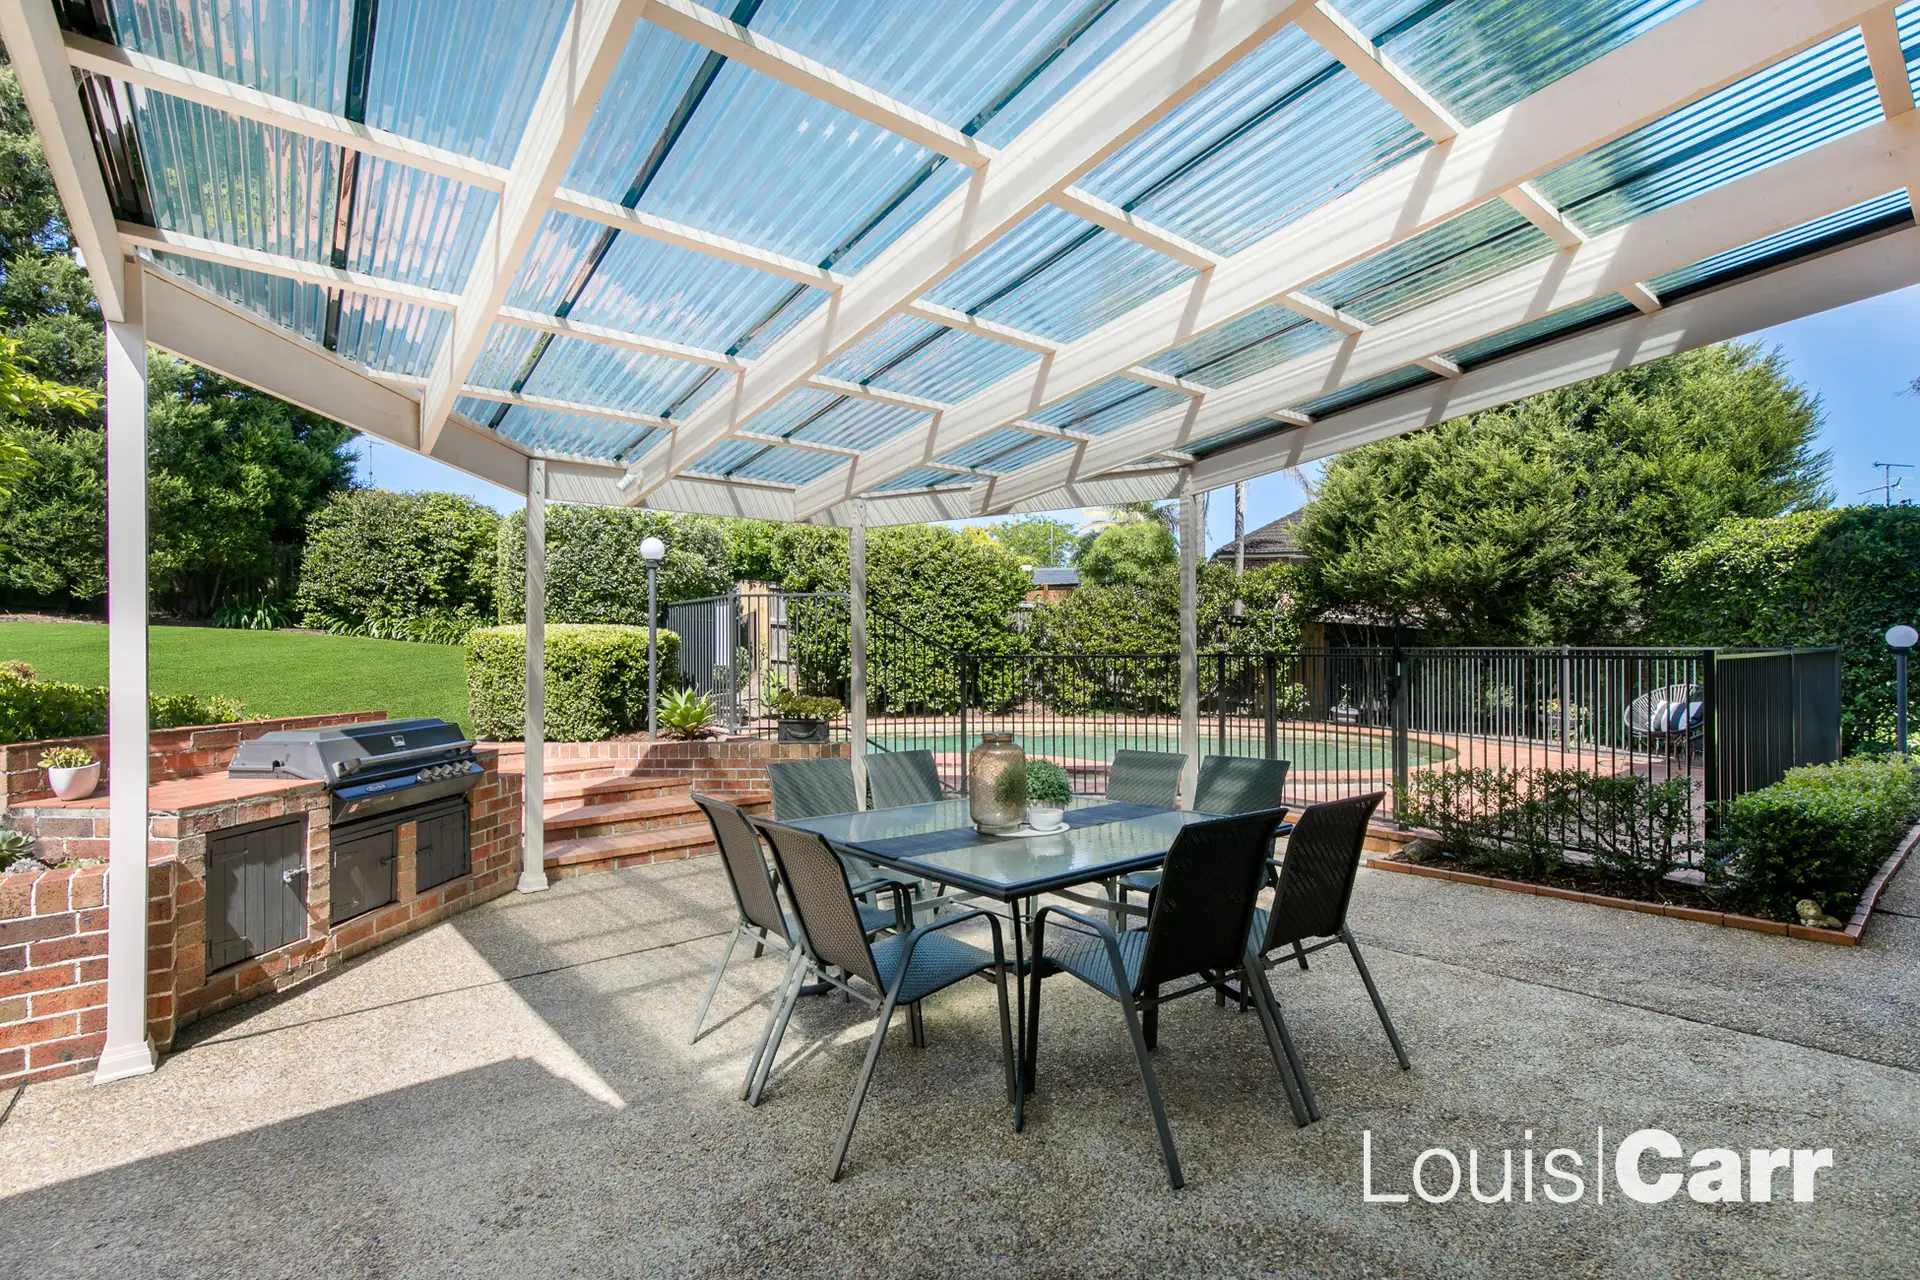 Photo #4: 12 Chiswick Place, Cherrybrook - Sold by Louis Carr Real Estate